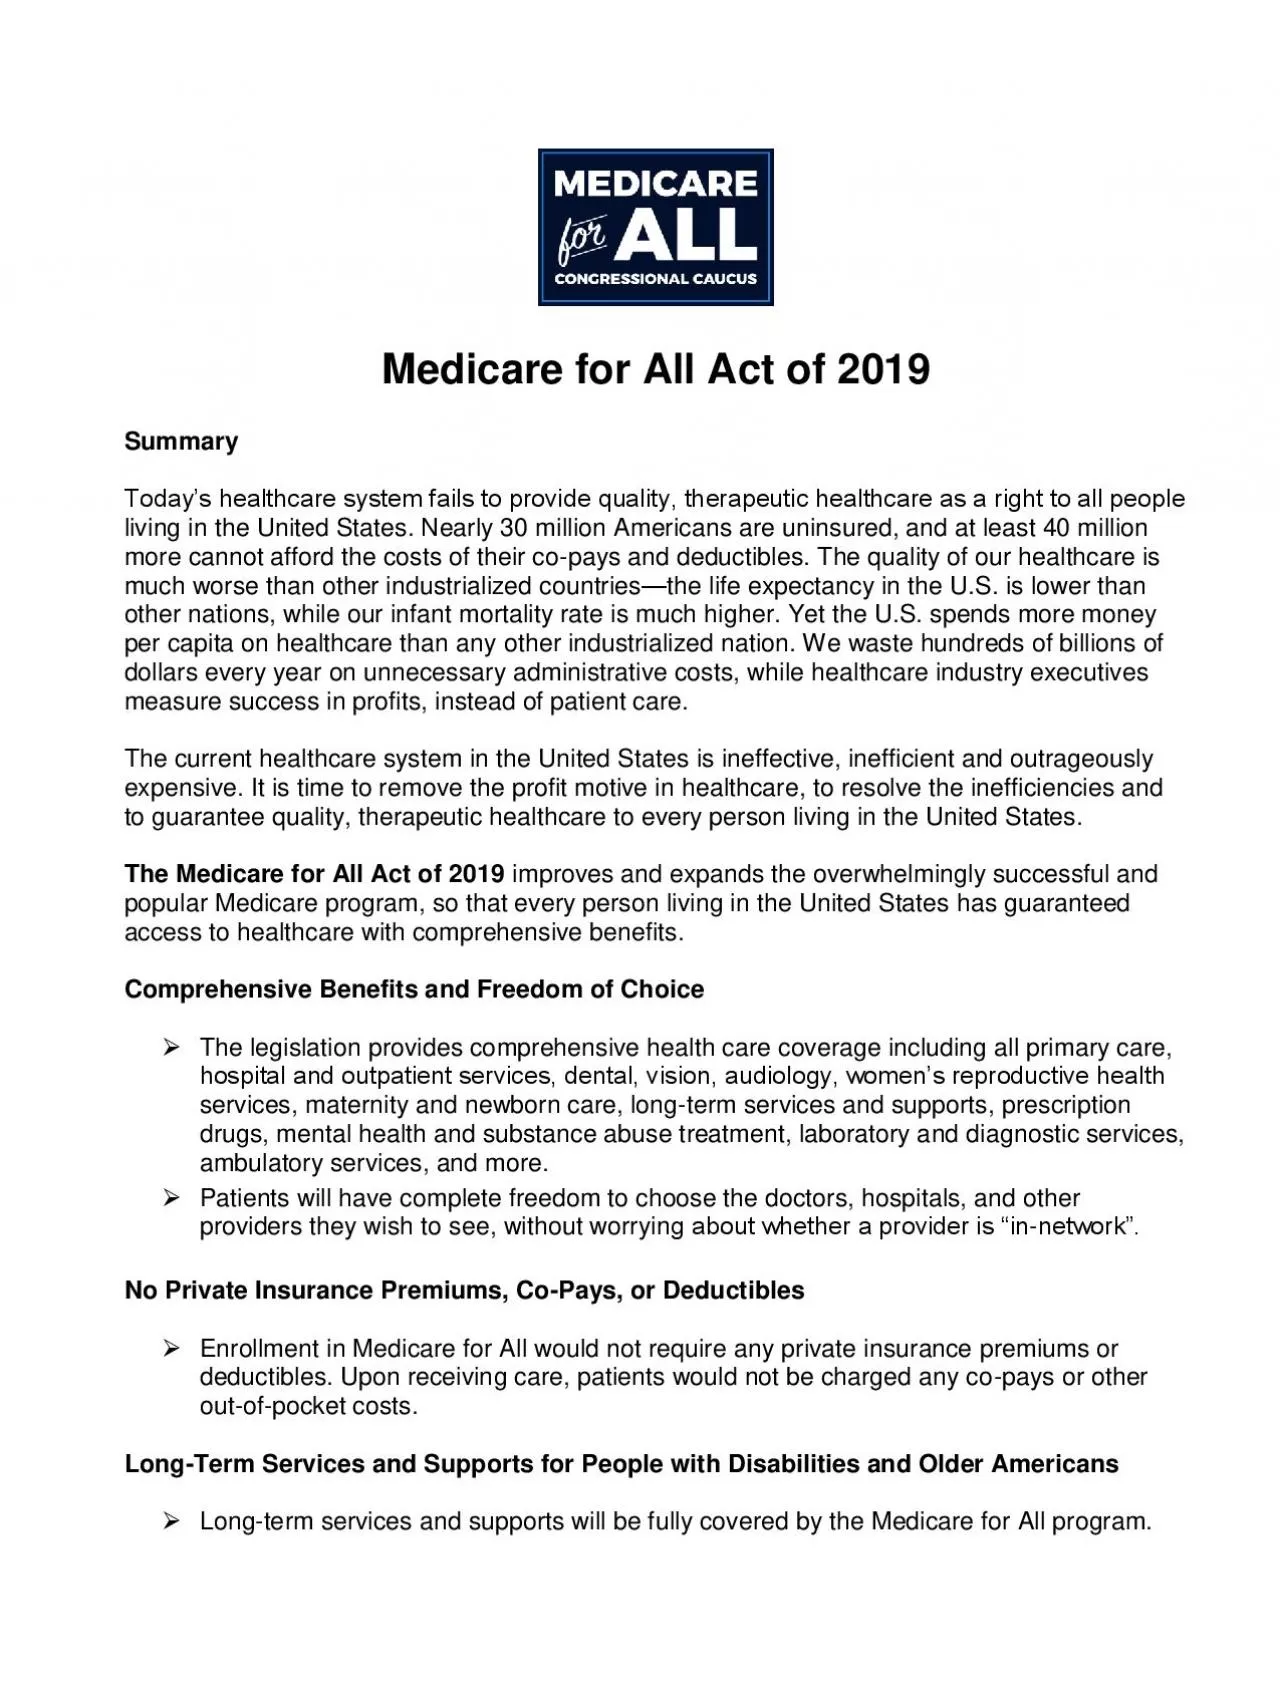 Medicare for All Act of 2019